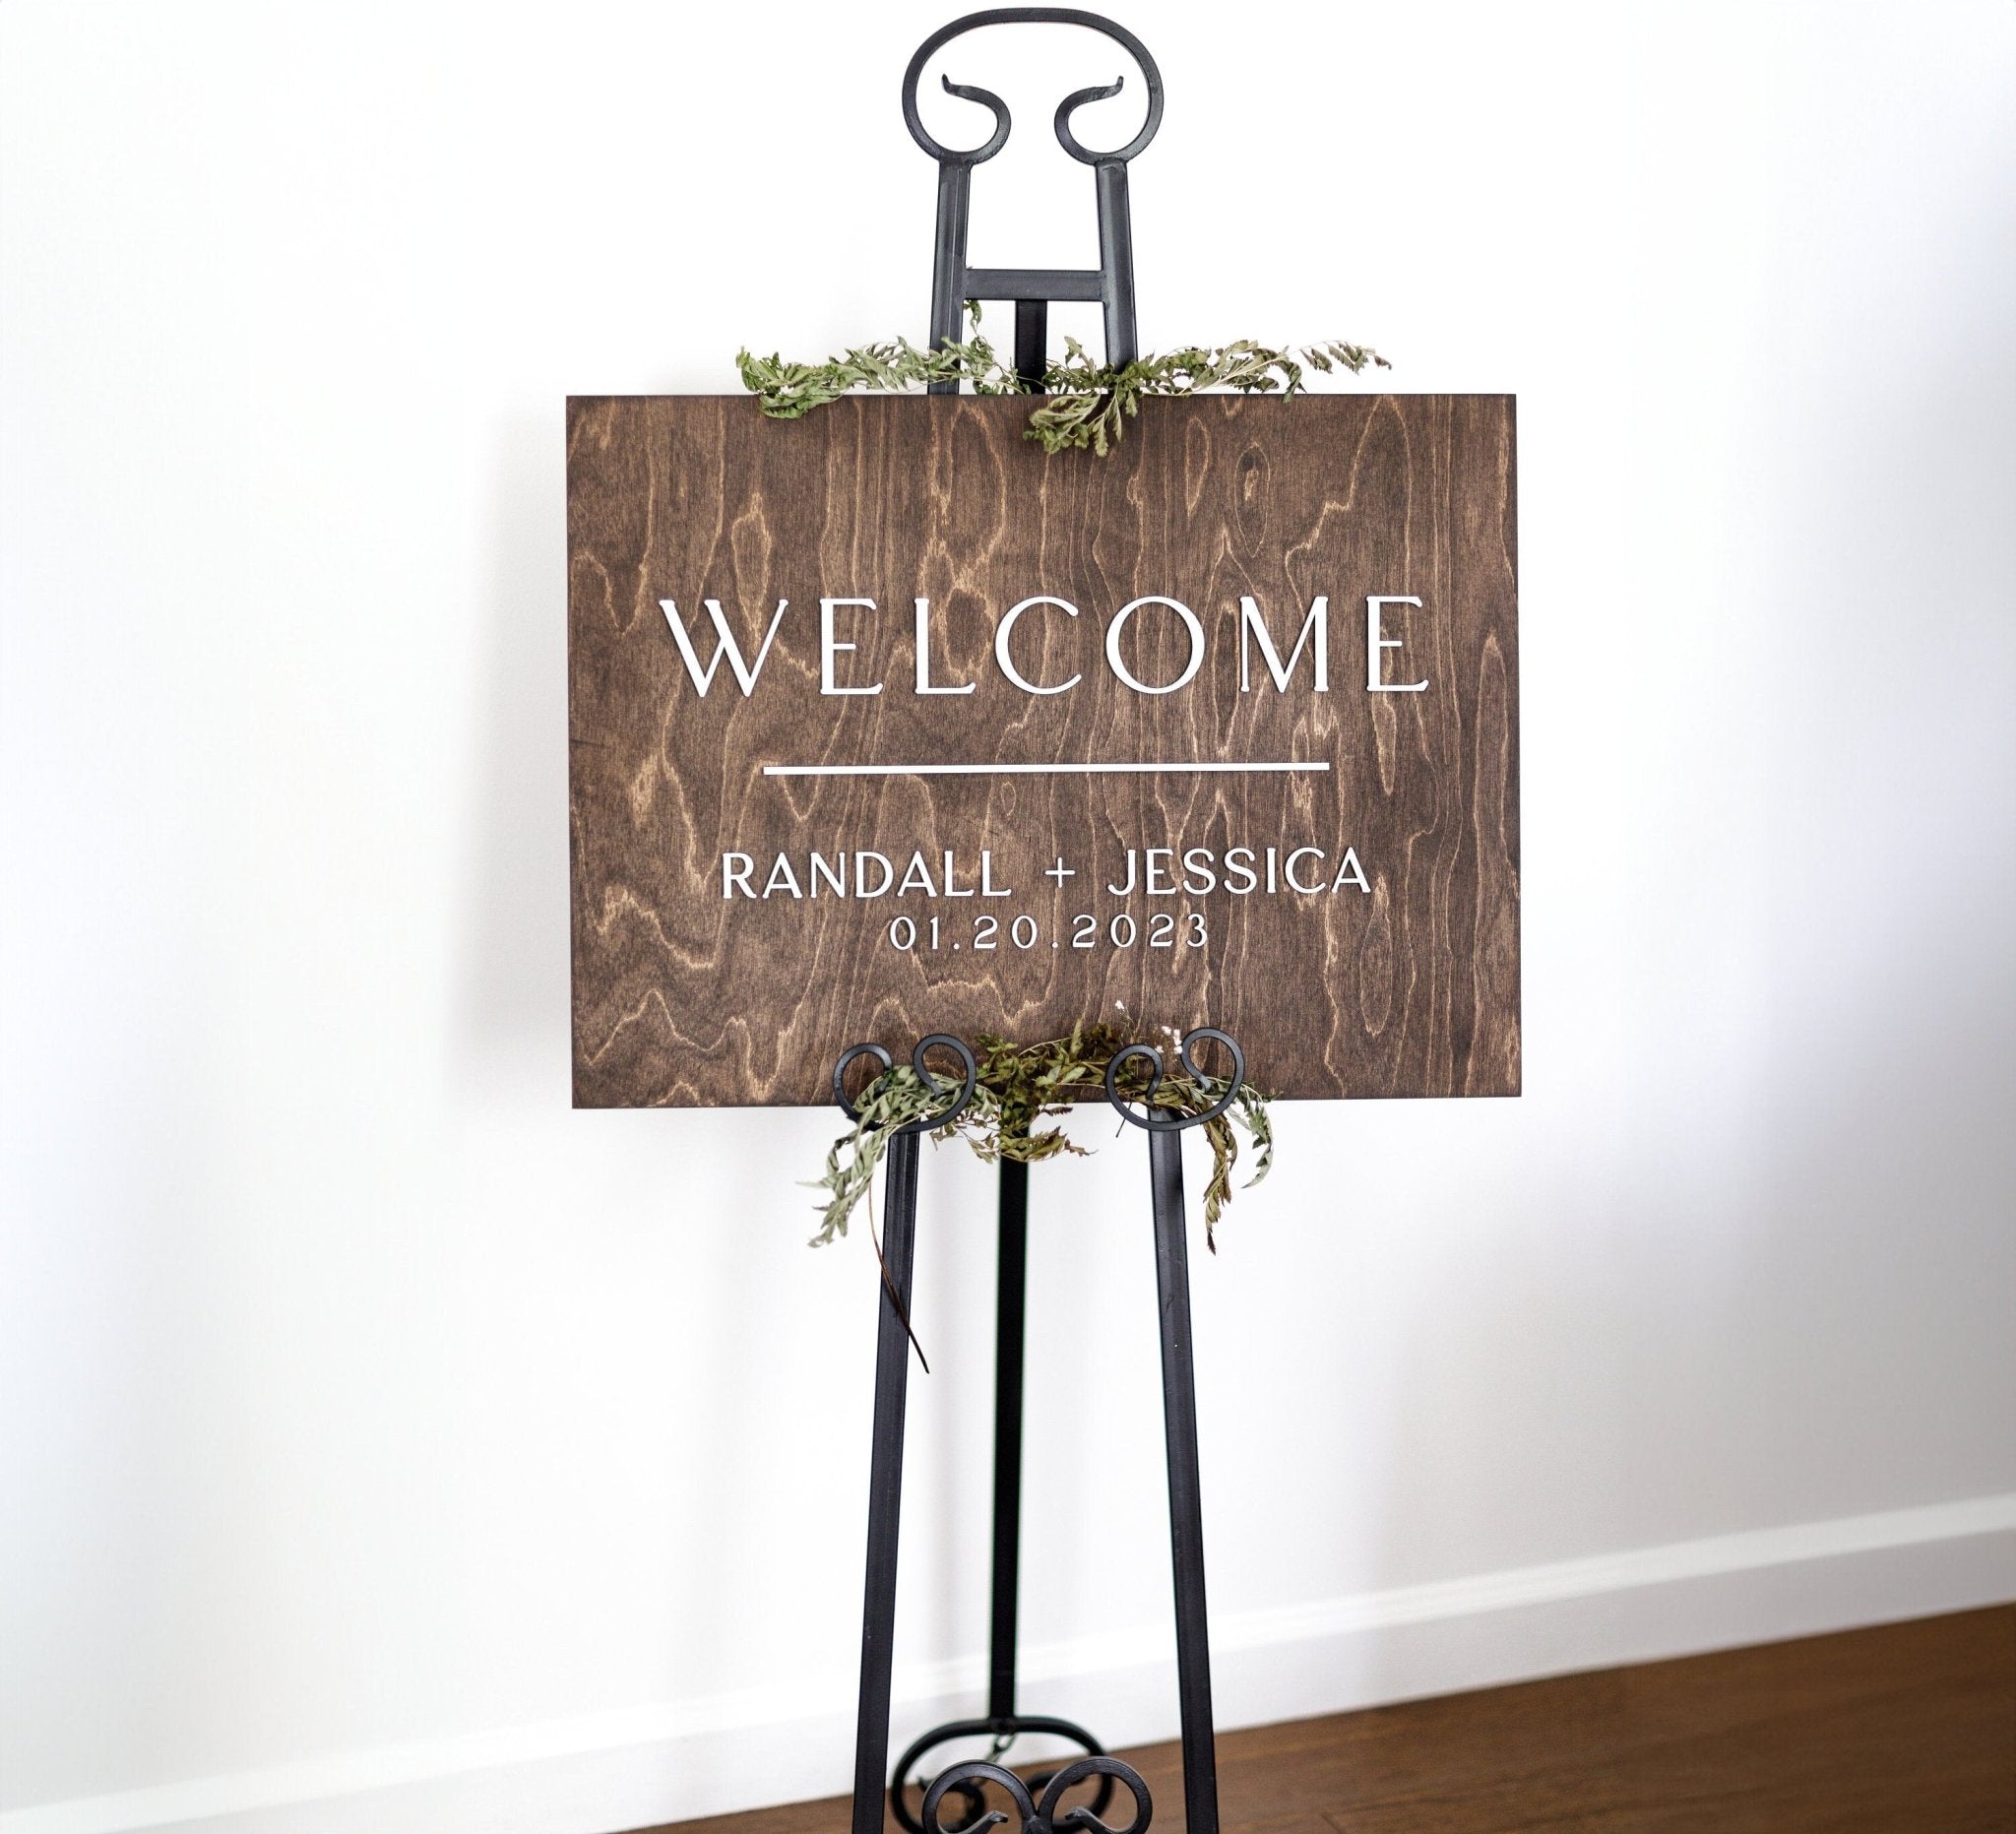 3D Minimalist wedding signage, Rustic Wedding Welcome Sign, Personalized Wood Wedding Sign, Raised Letters Wedding Name Board - Small Town Timbers